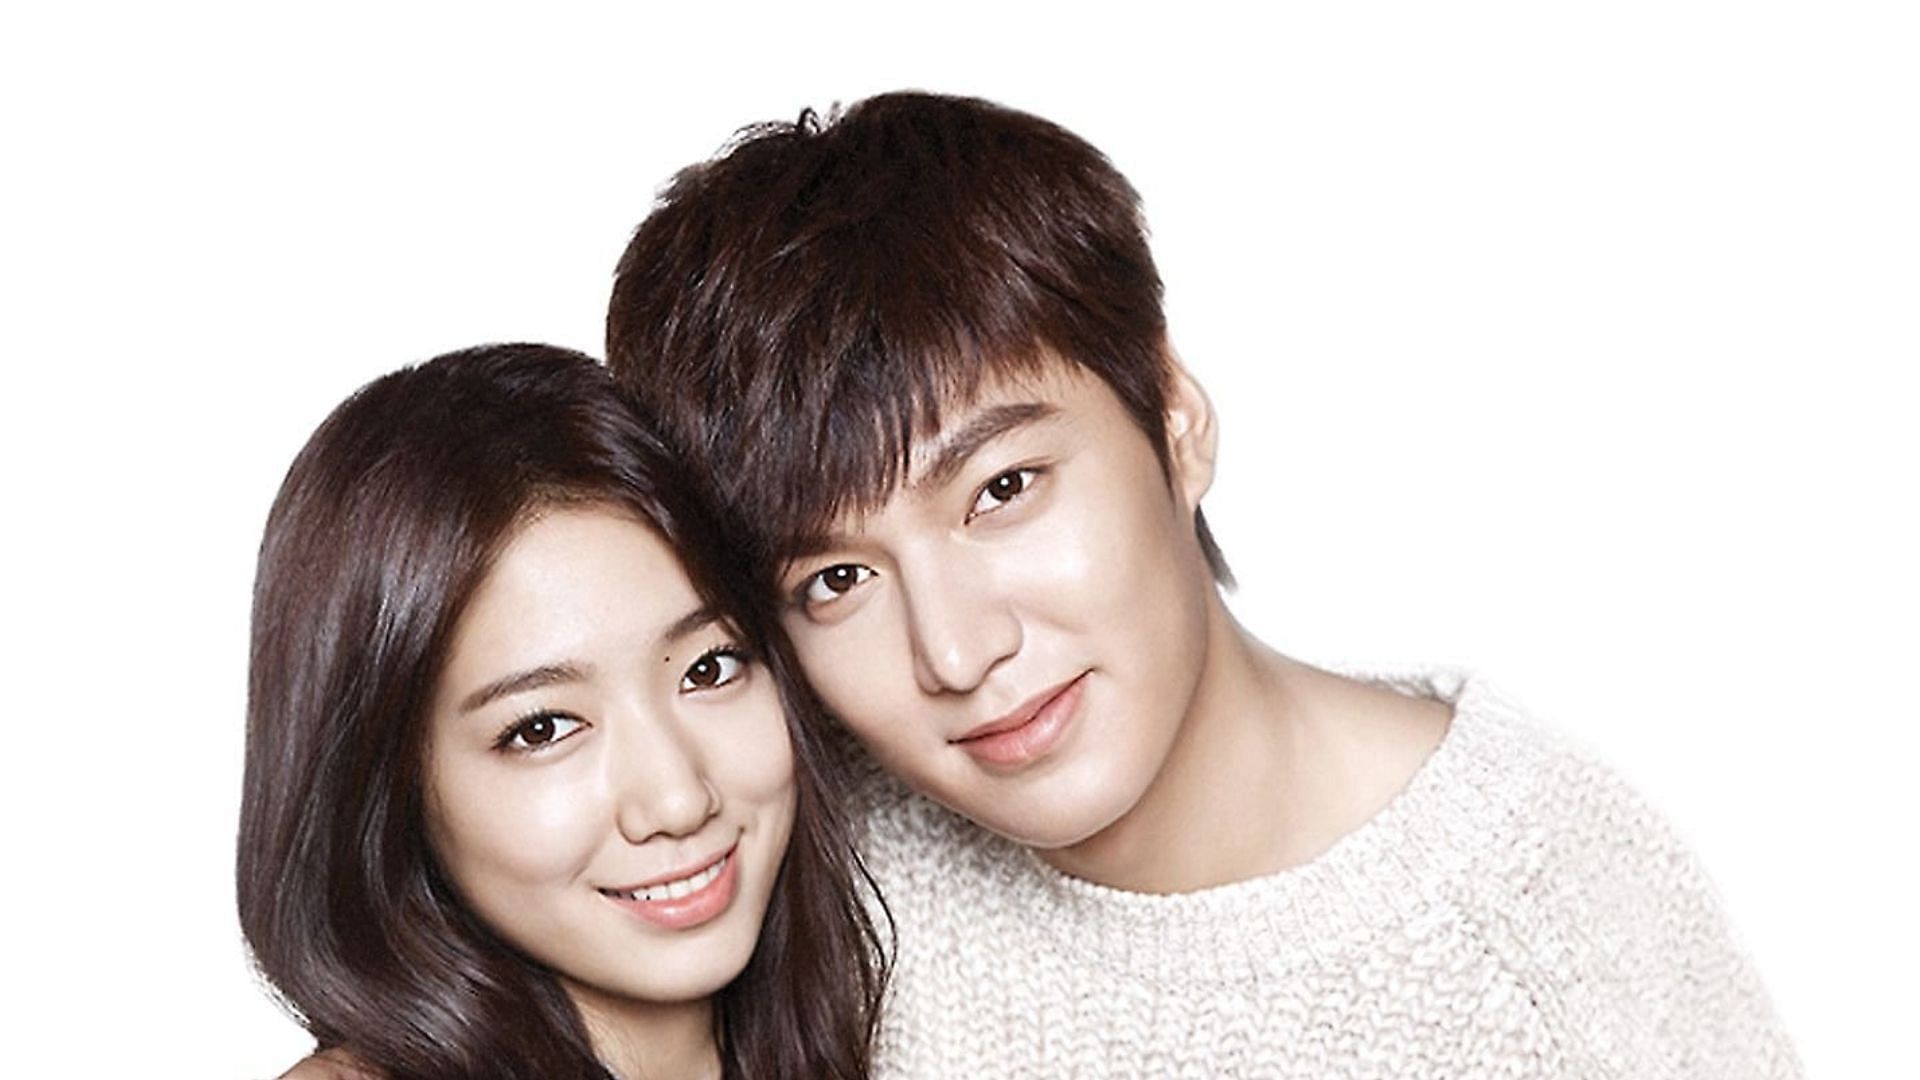 Lee Min-ho starrer The Heirs celebrates its 10 years anniversary today (Image via Twitter/@brunette931)